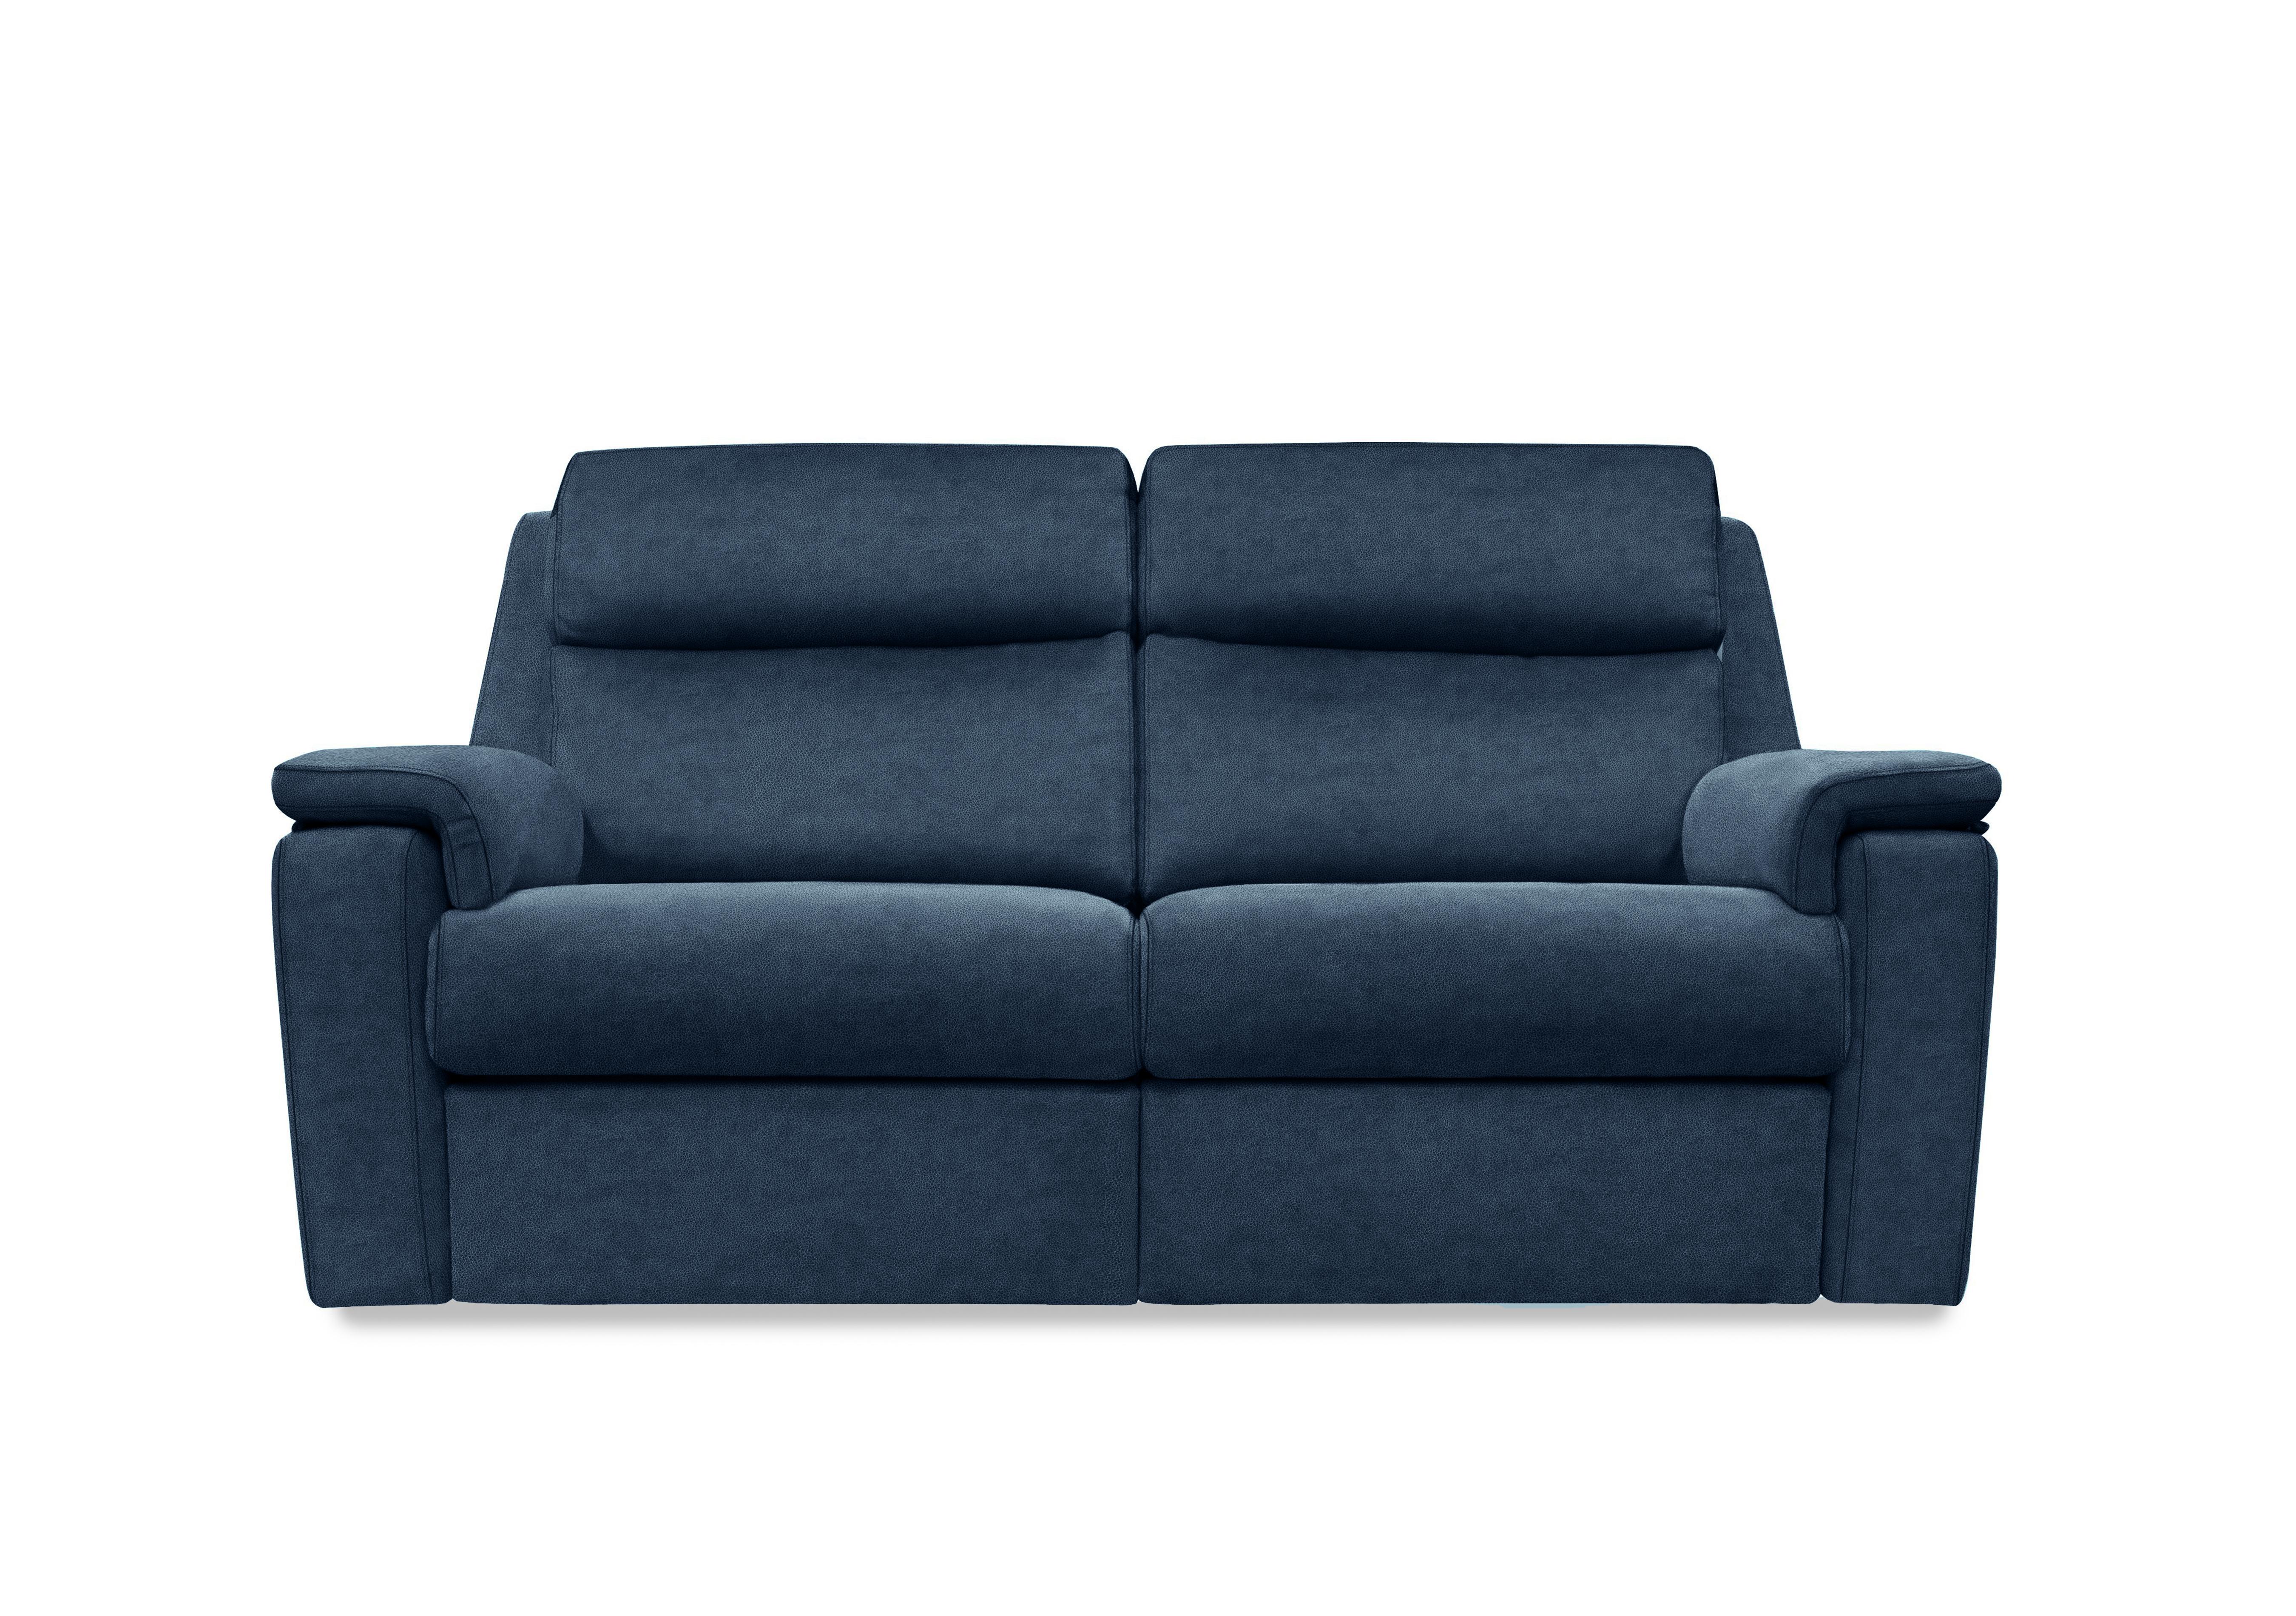 Thornbury 3 Seater Fabric Power Recliner Sofa with Power Headrests and Power Lumbar in A125 Stingray Indigo on Furniture Village